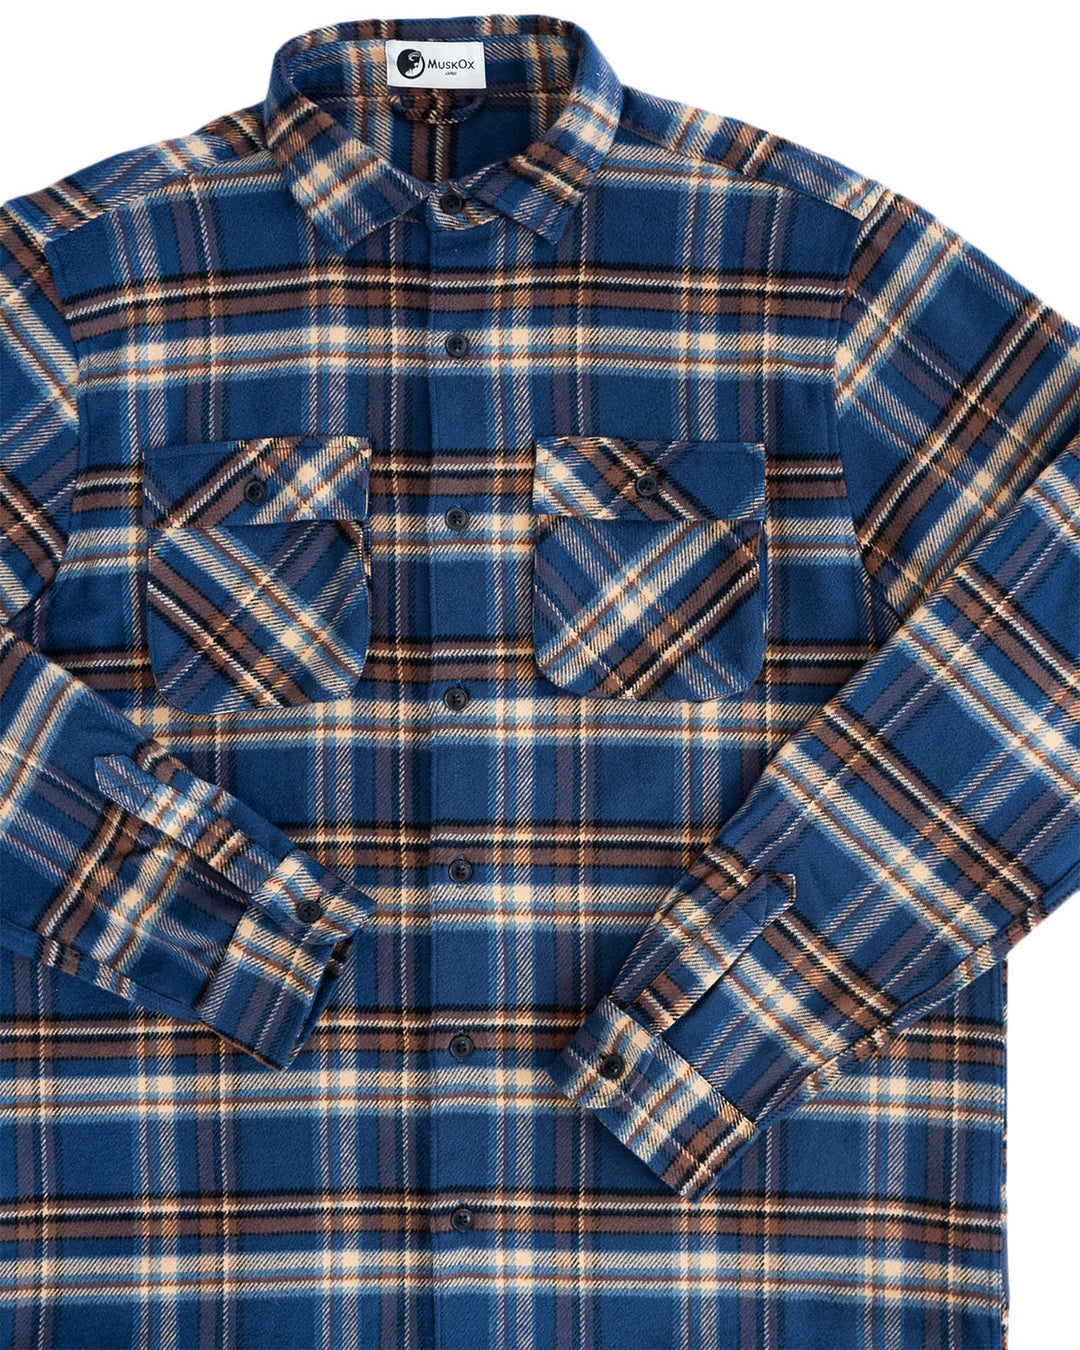 Relaxed Fitting Flannel Shirt for Men in Pecan Plaid